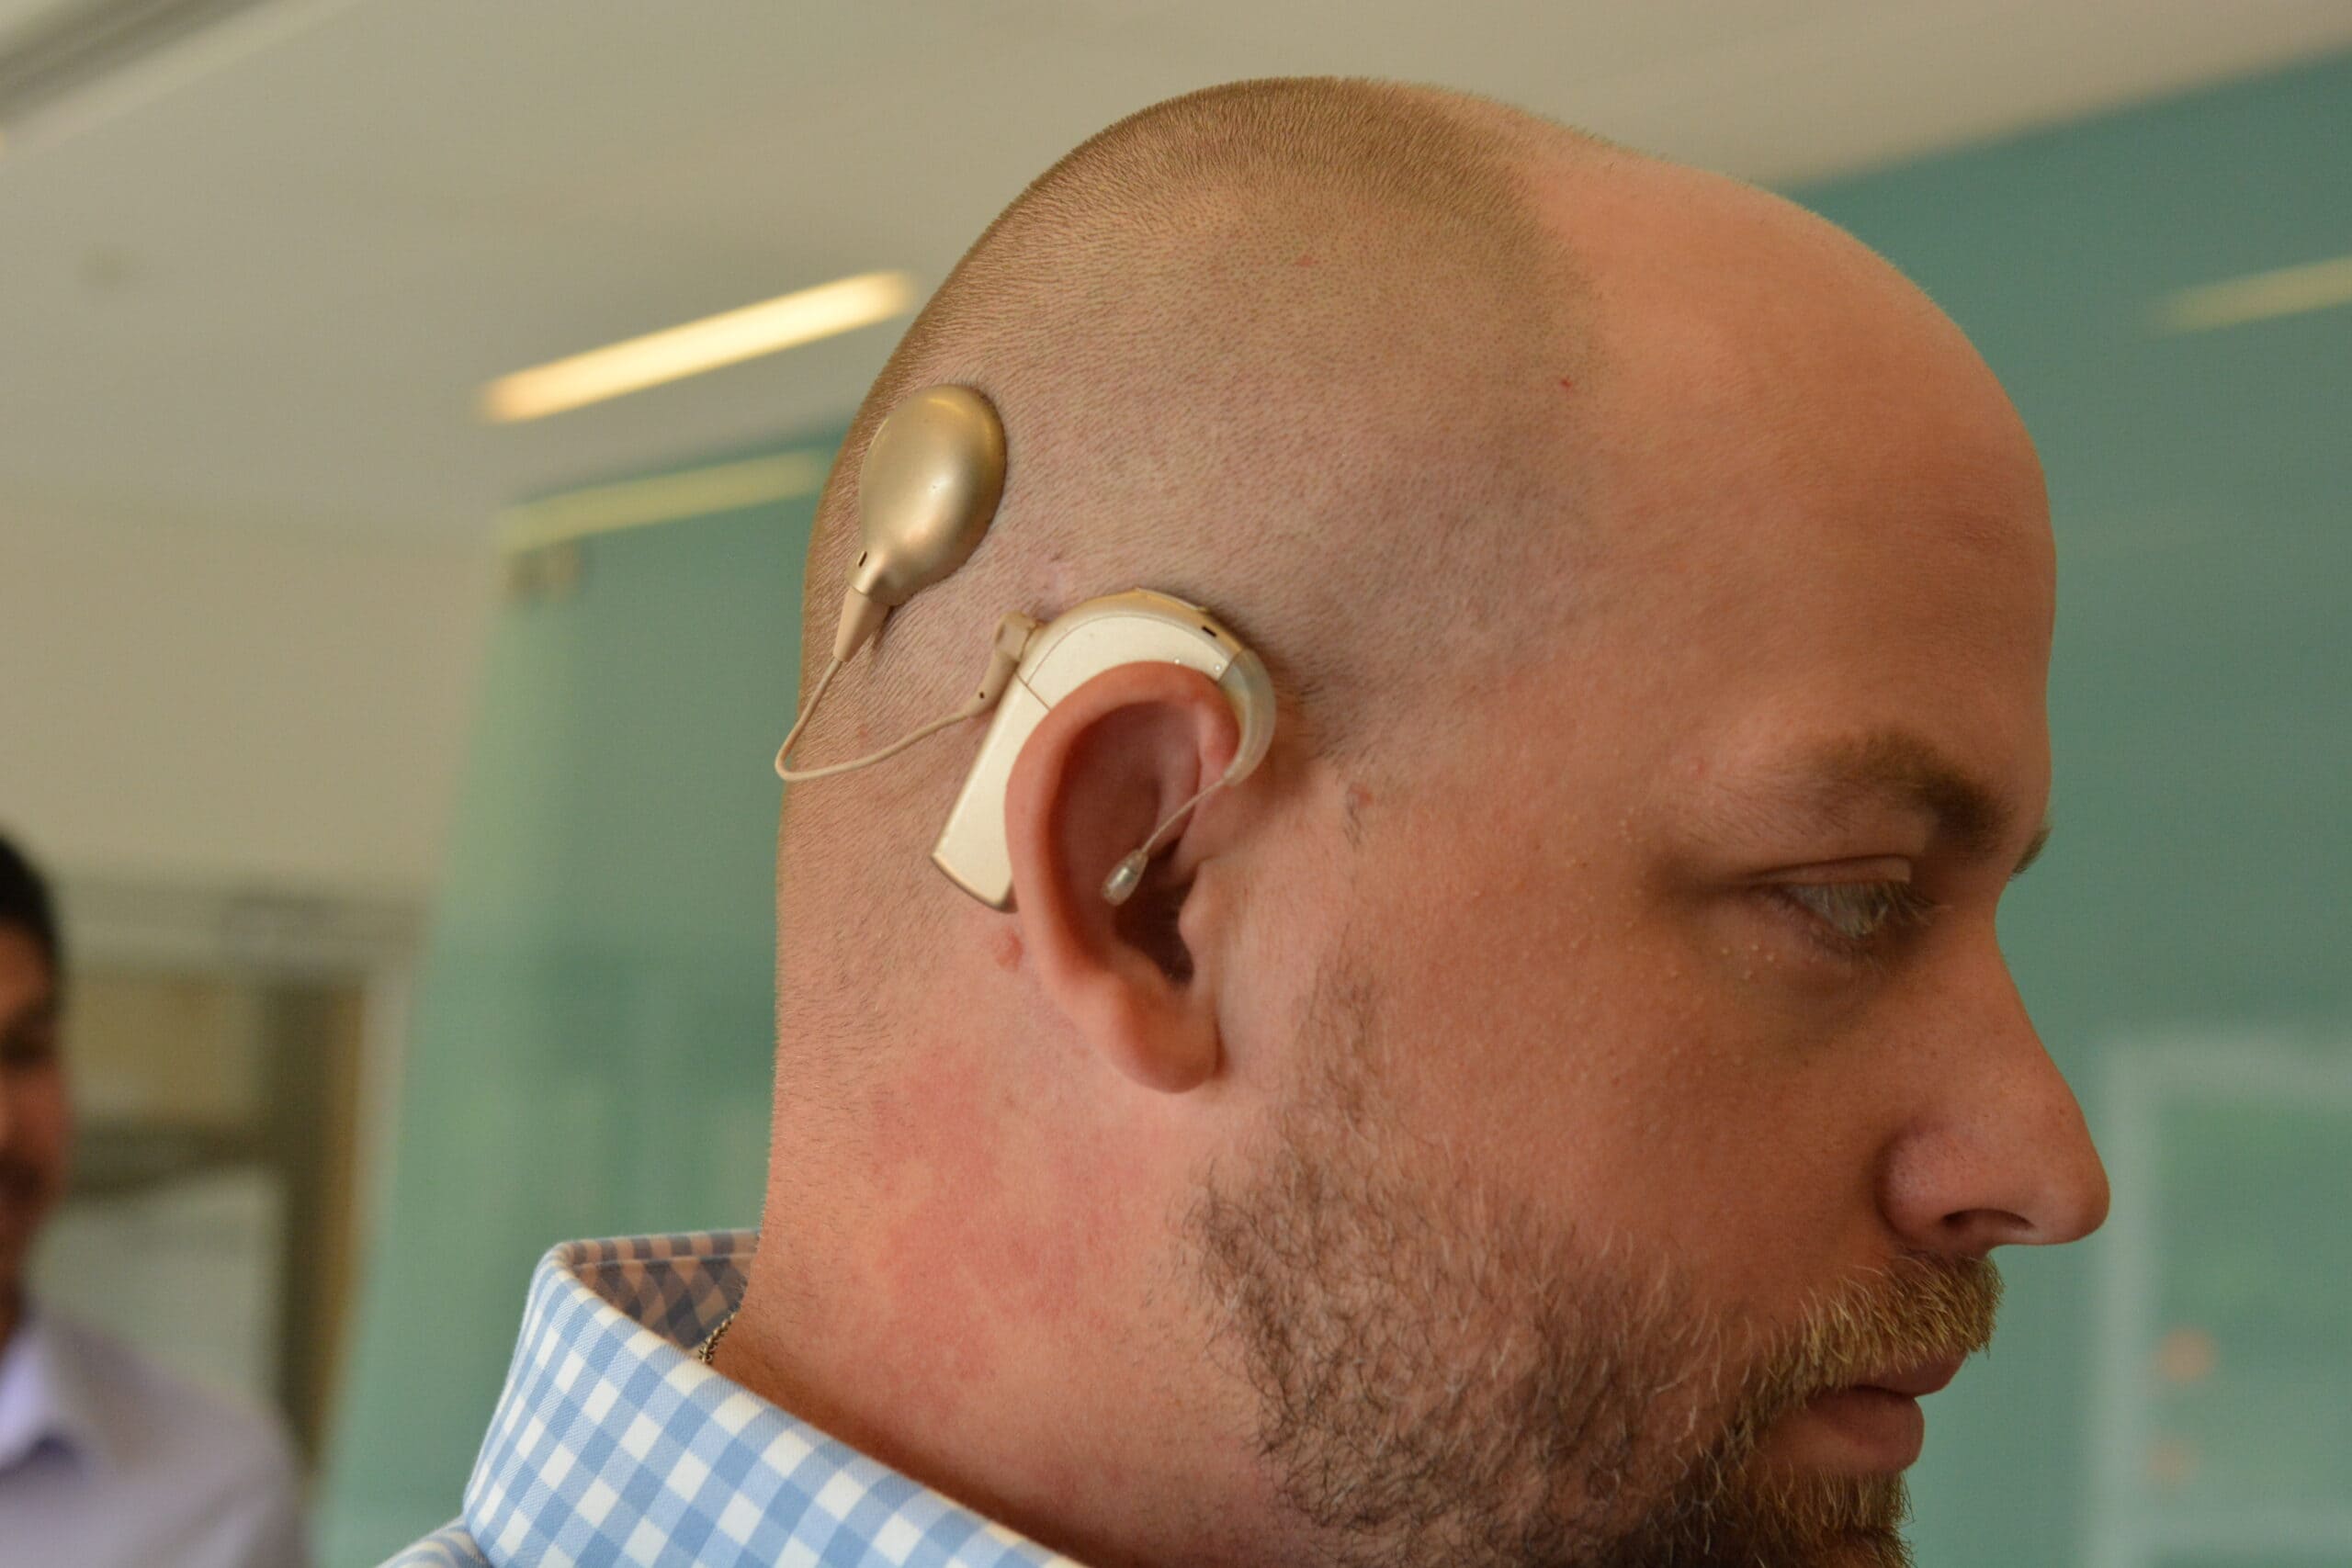 Audiology patient displays cochlear implant device